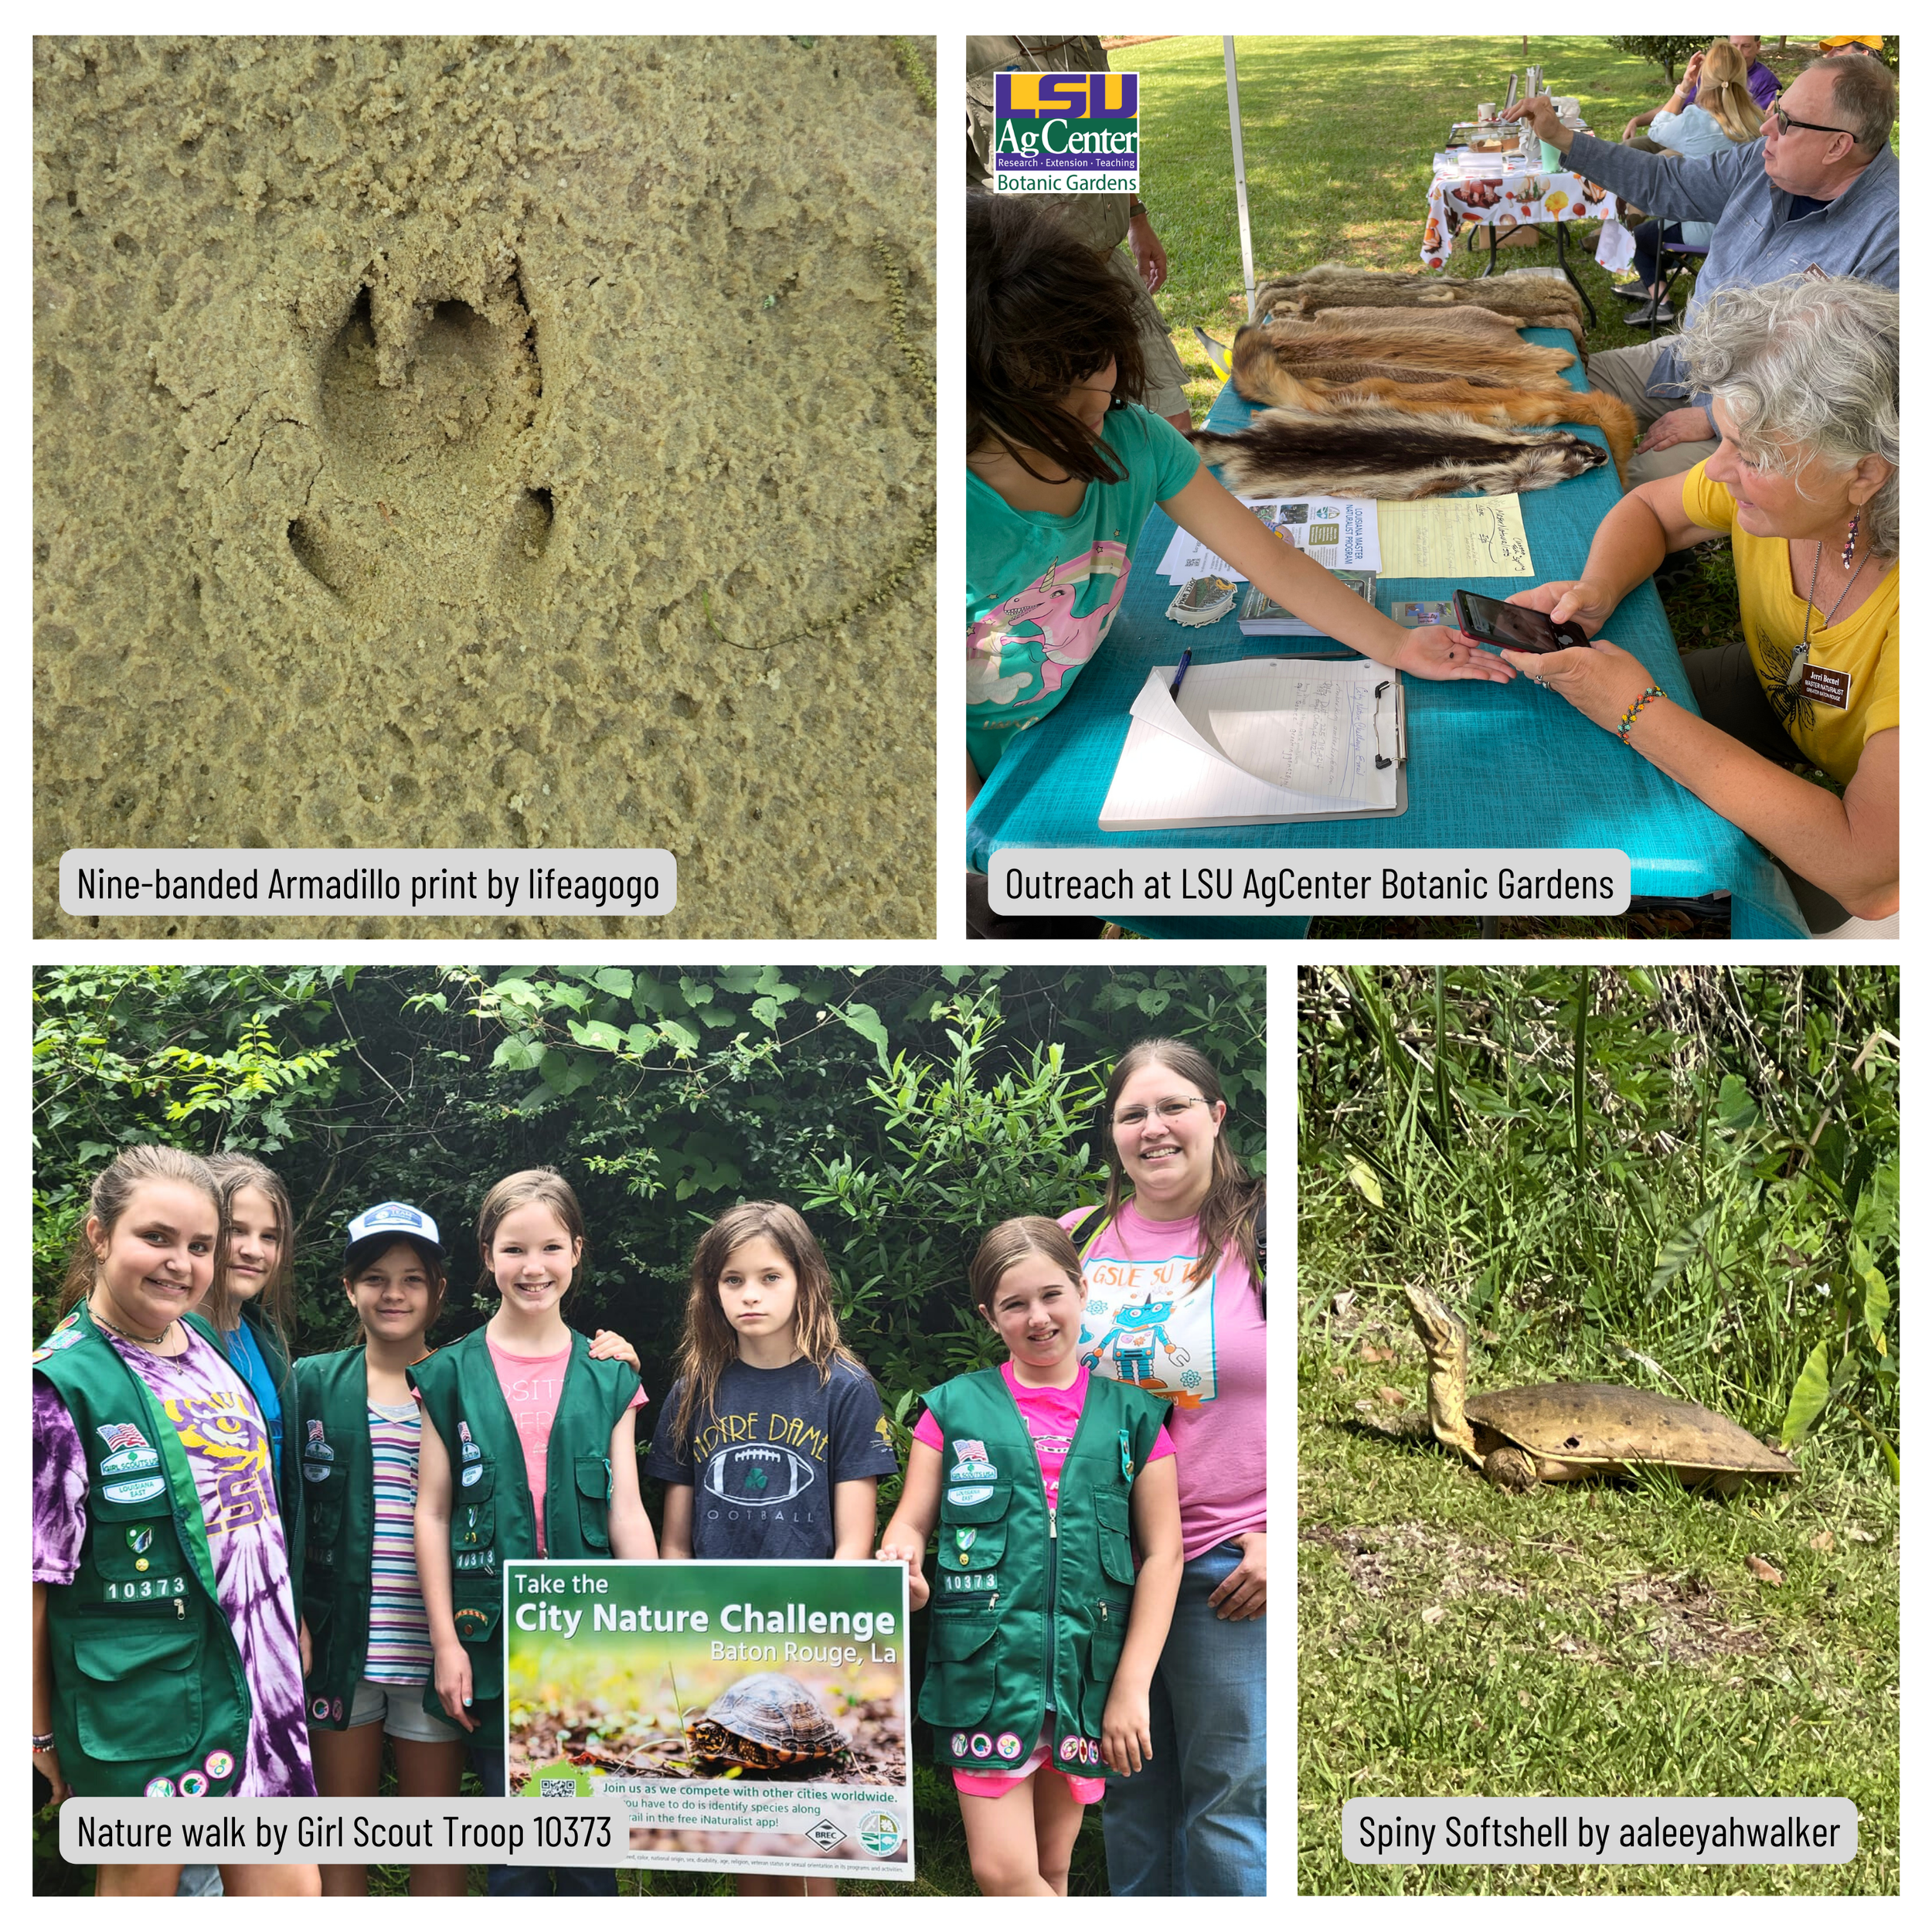  Nine-banded Armadillo print; Outreach at the LSU AgCenter Botanic Gardens; Nature walk by Girl Scout Troop 10373; Spiny Softshell turtle. 